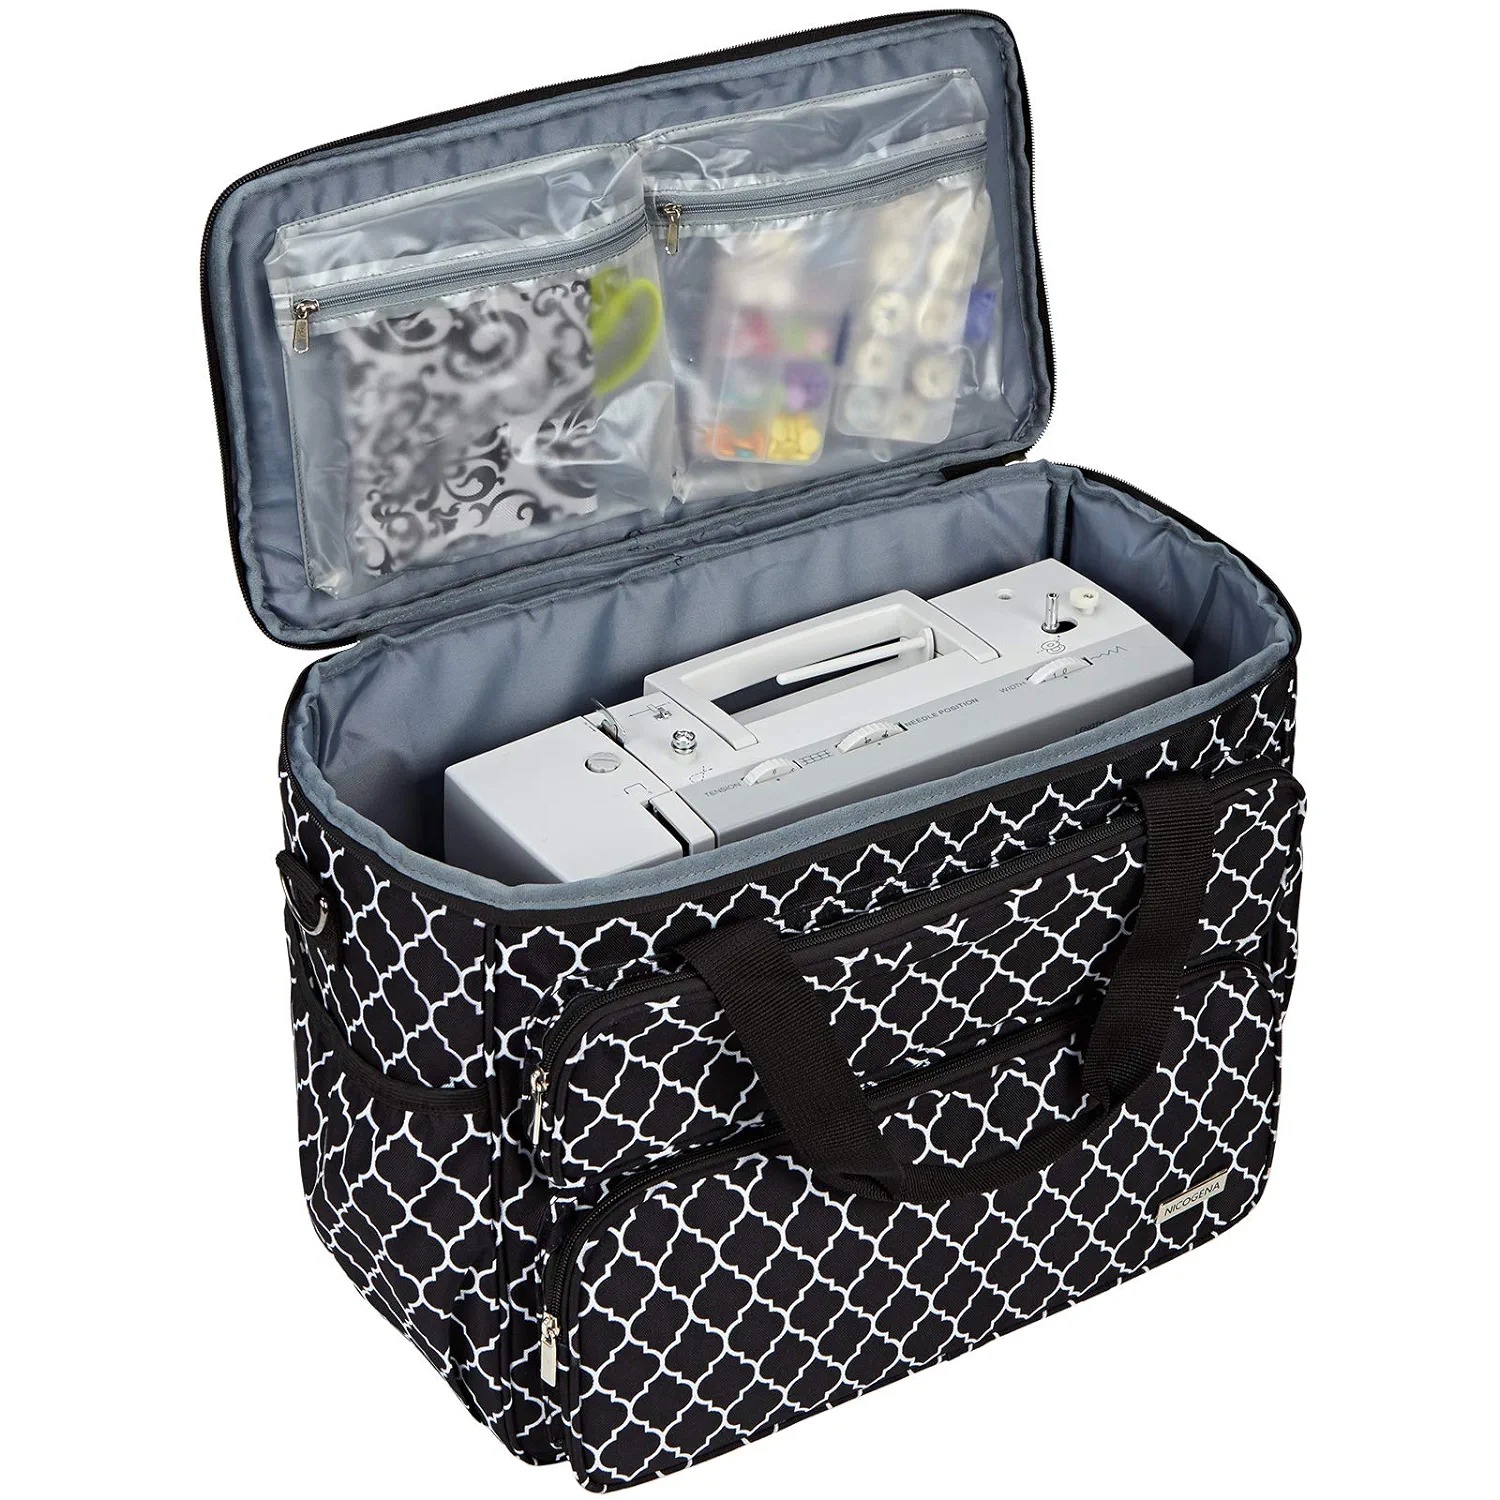 Sewing Machine Carrying Case, Universal Travel Tote Bag With Shoulder St... - $54.99